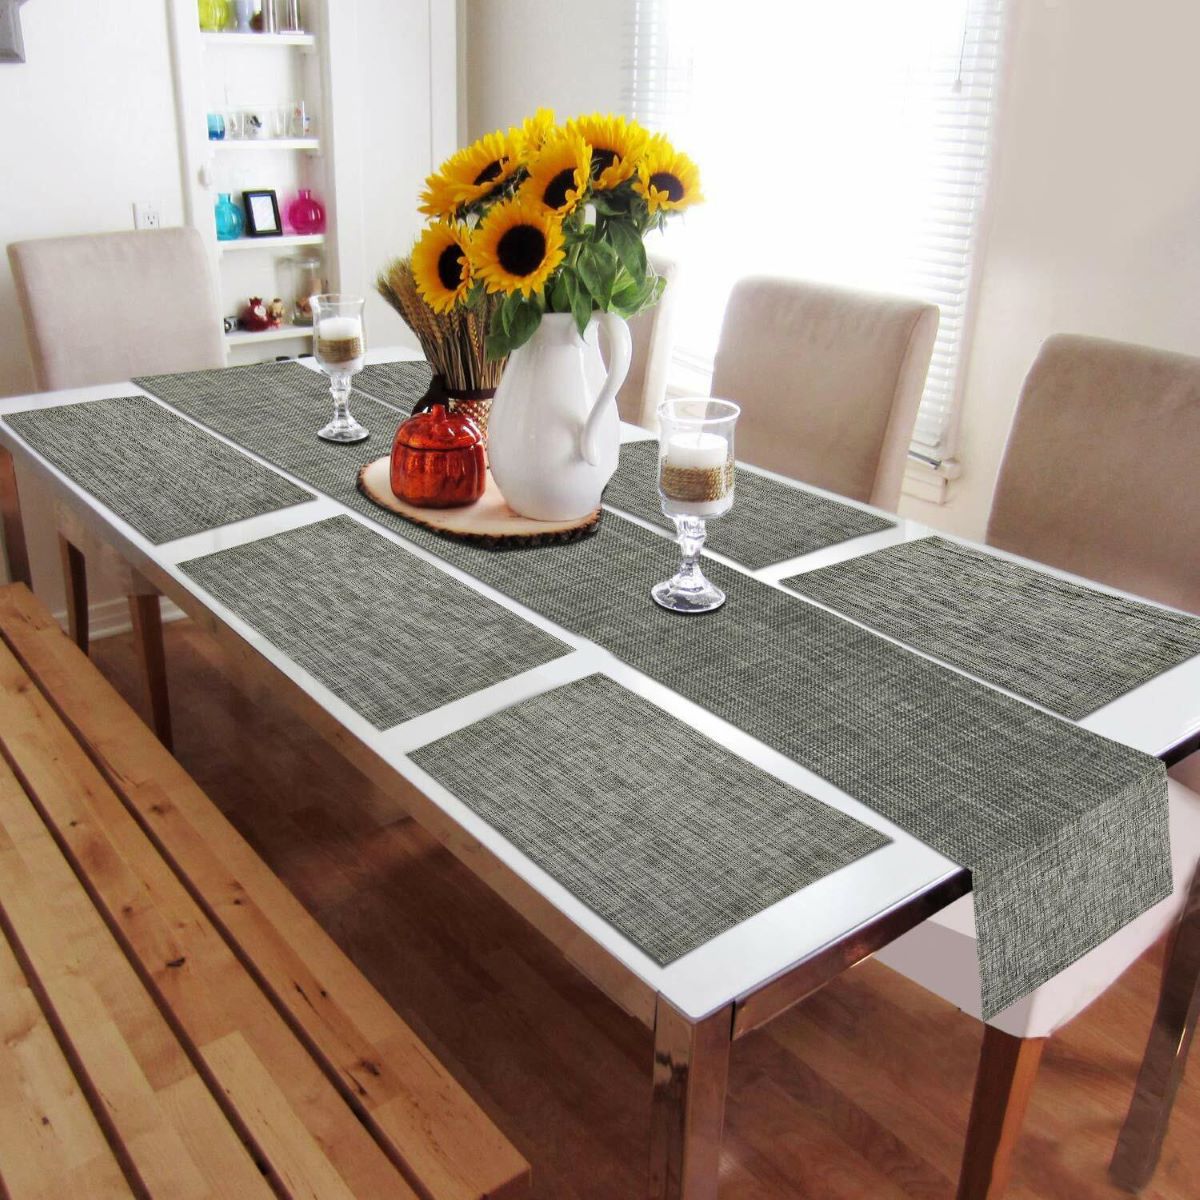 How To Make Table Runners And Placemats